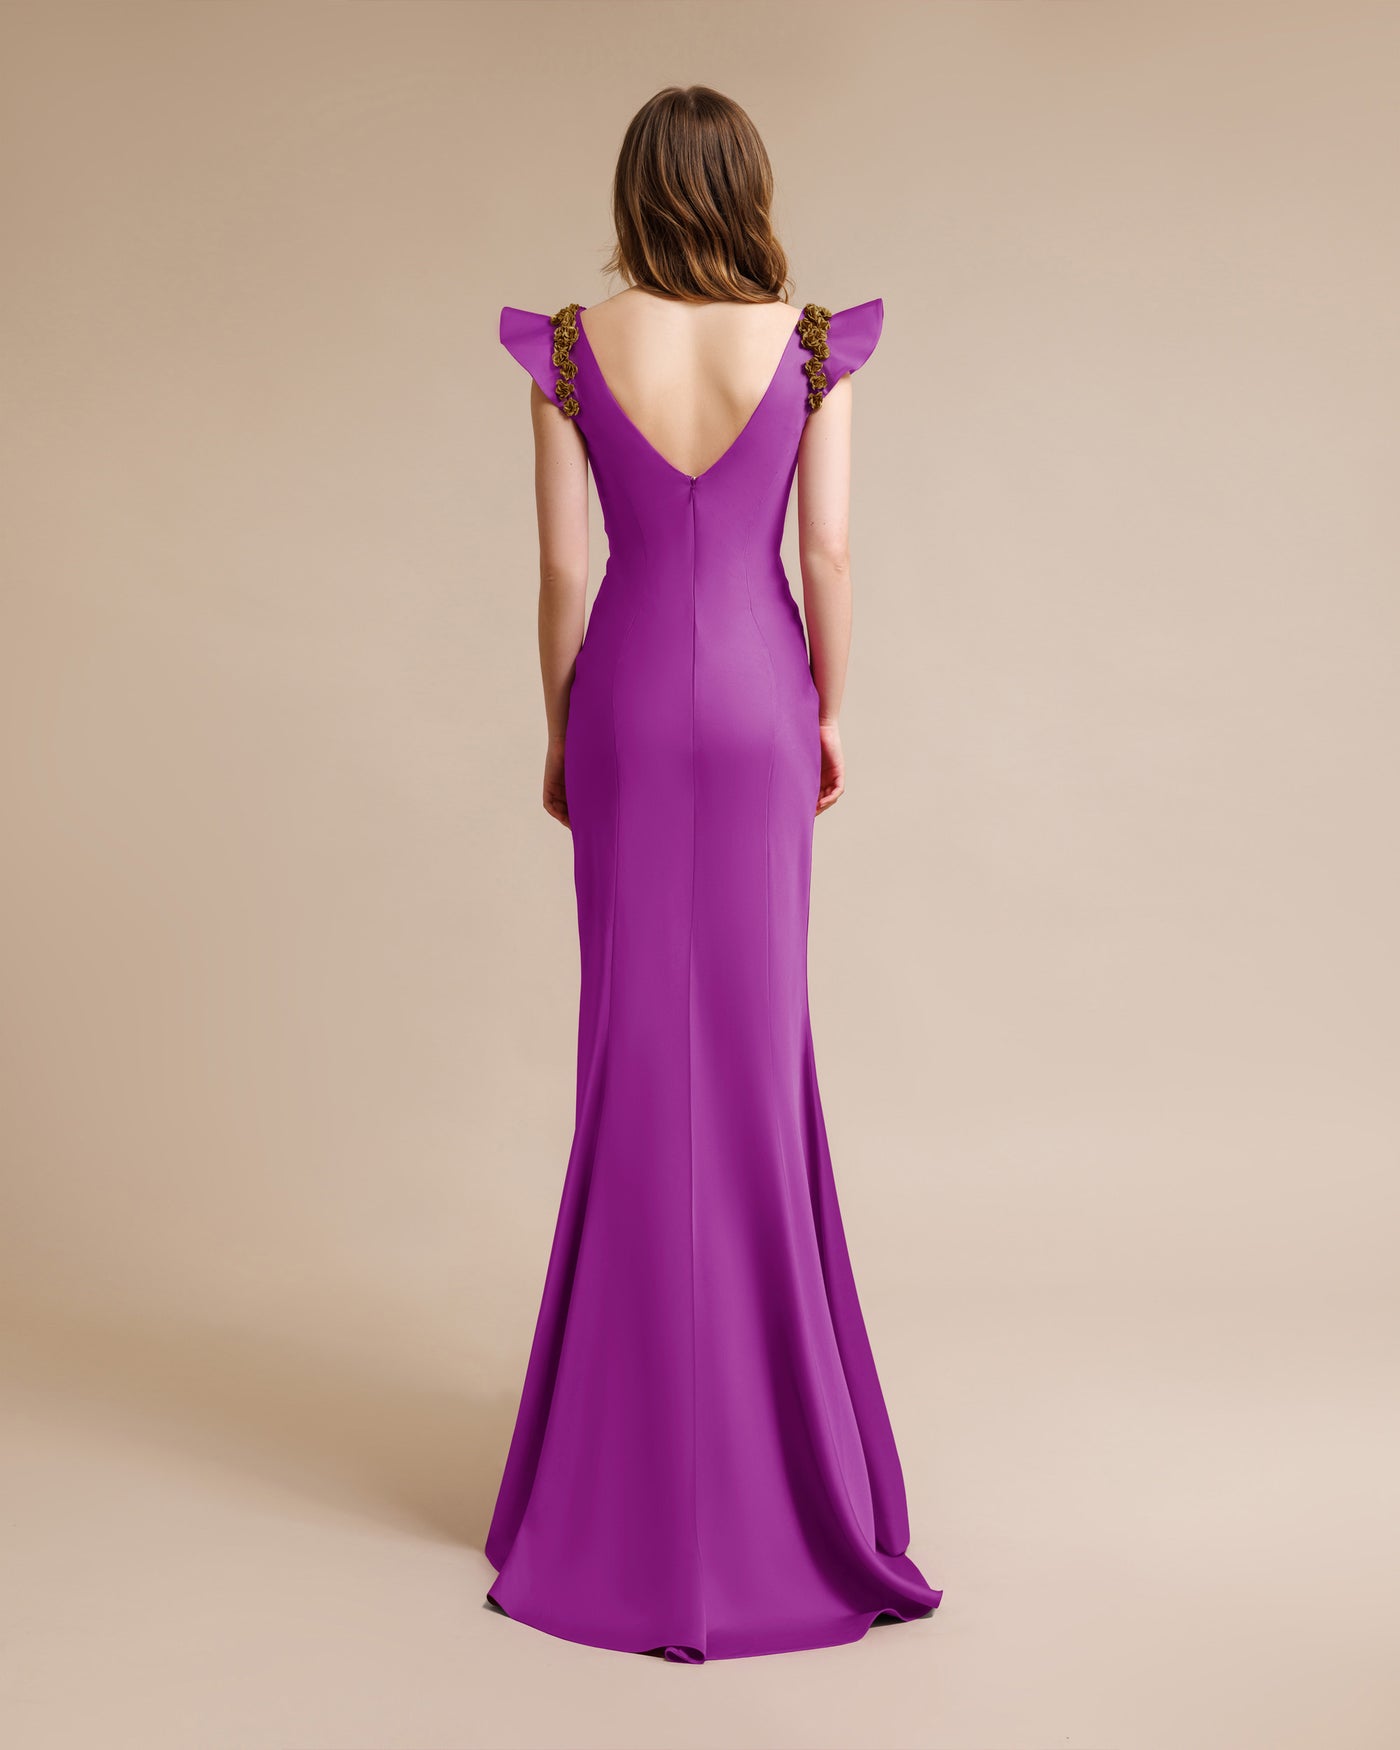 Dress With High Front Slit